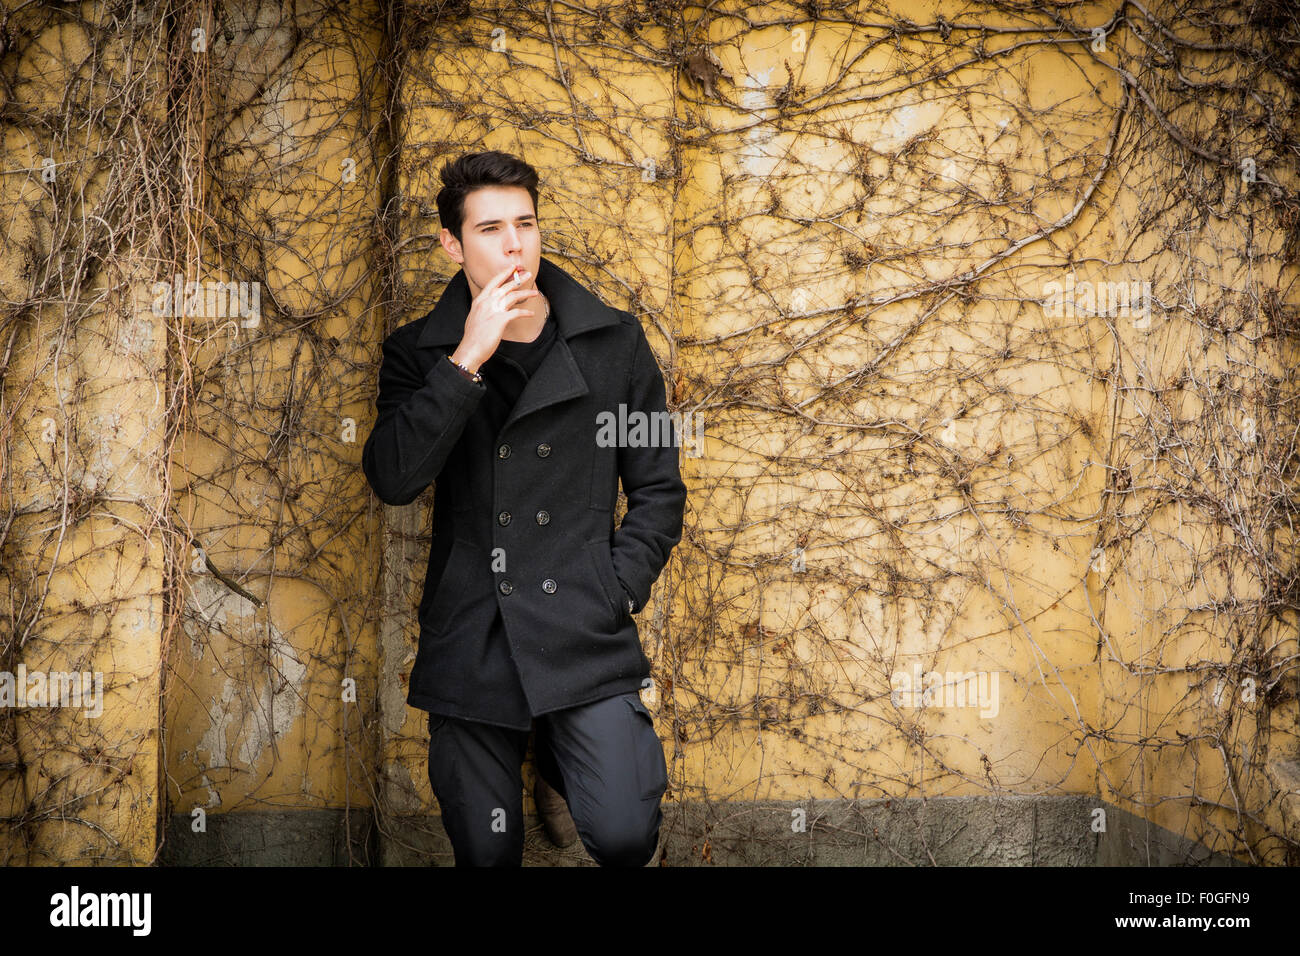 Handsome serious young man standing against plant covered wall, wearing winter clothes, smoking cigarette Stock Photo